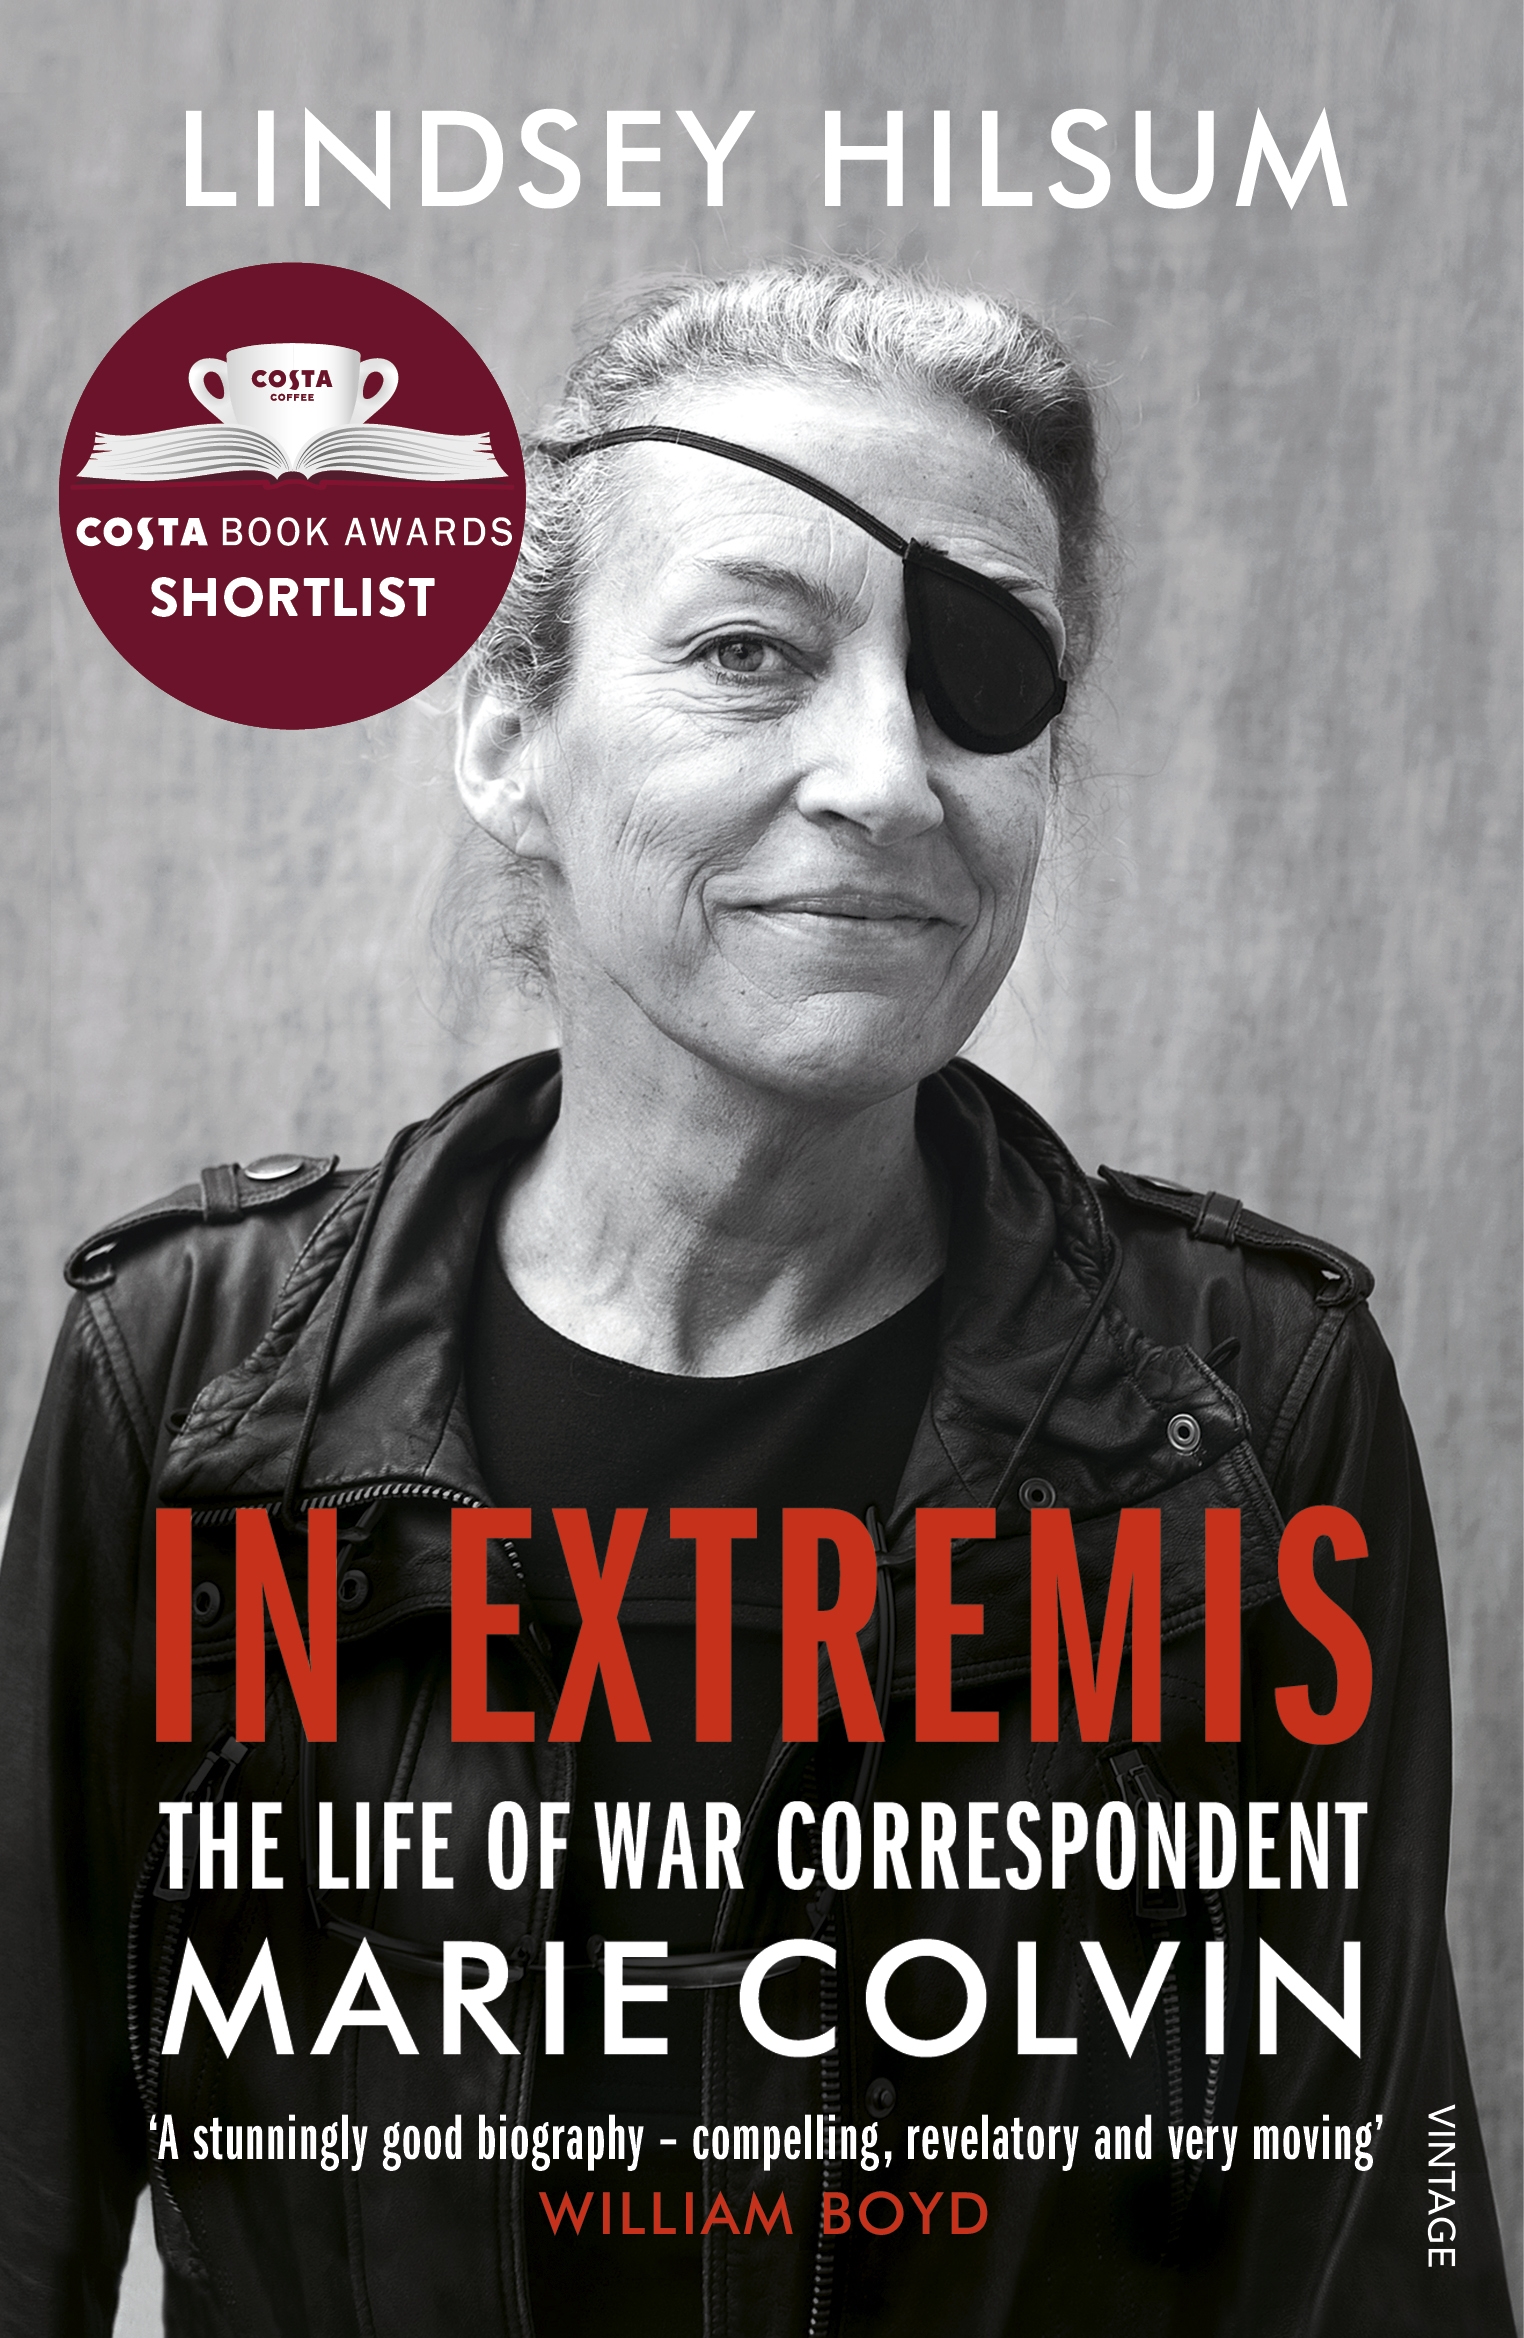 In Extremis - The Life of War Correspondent Marie Colvin - Hilsum, Lindsey